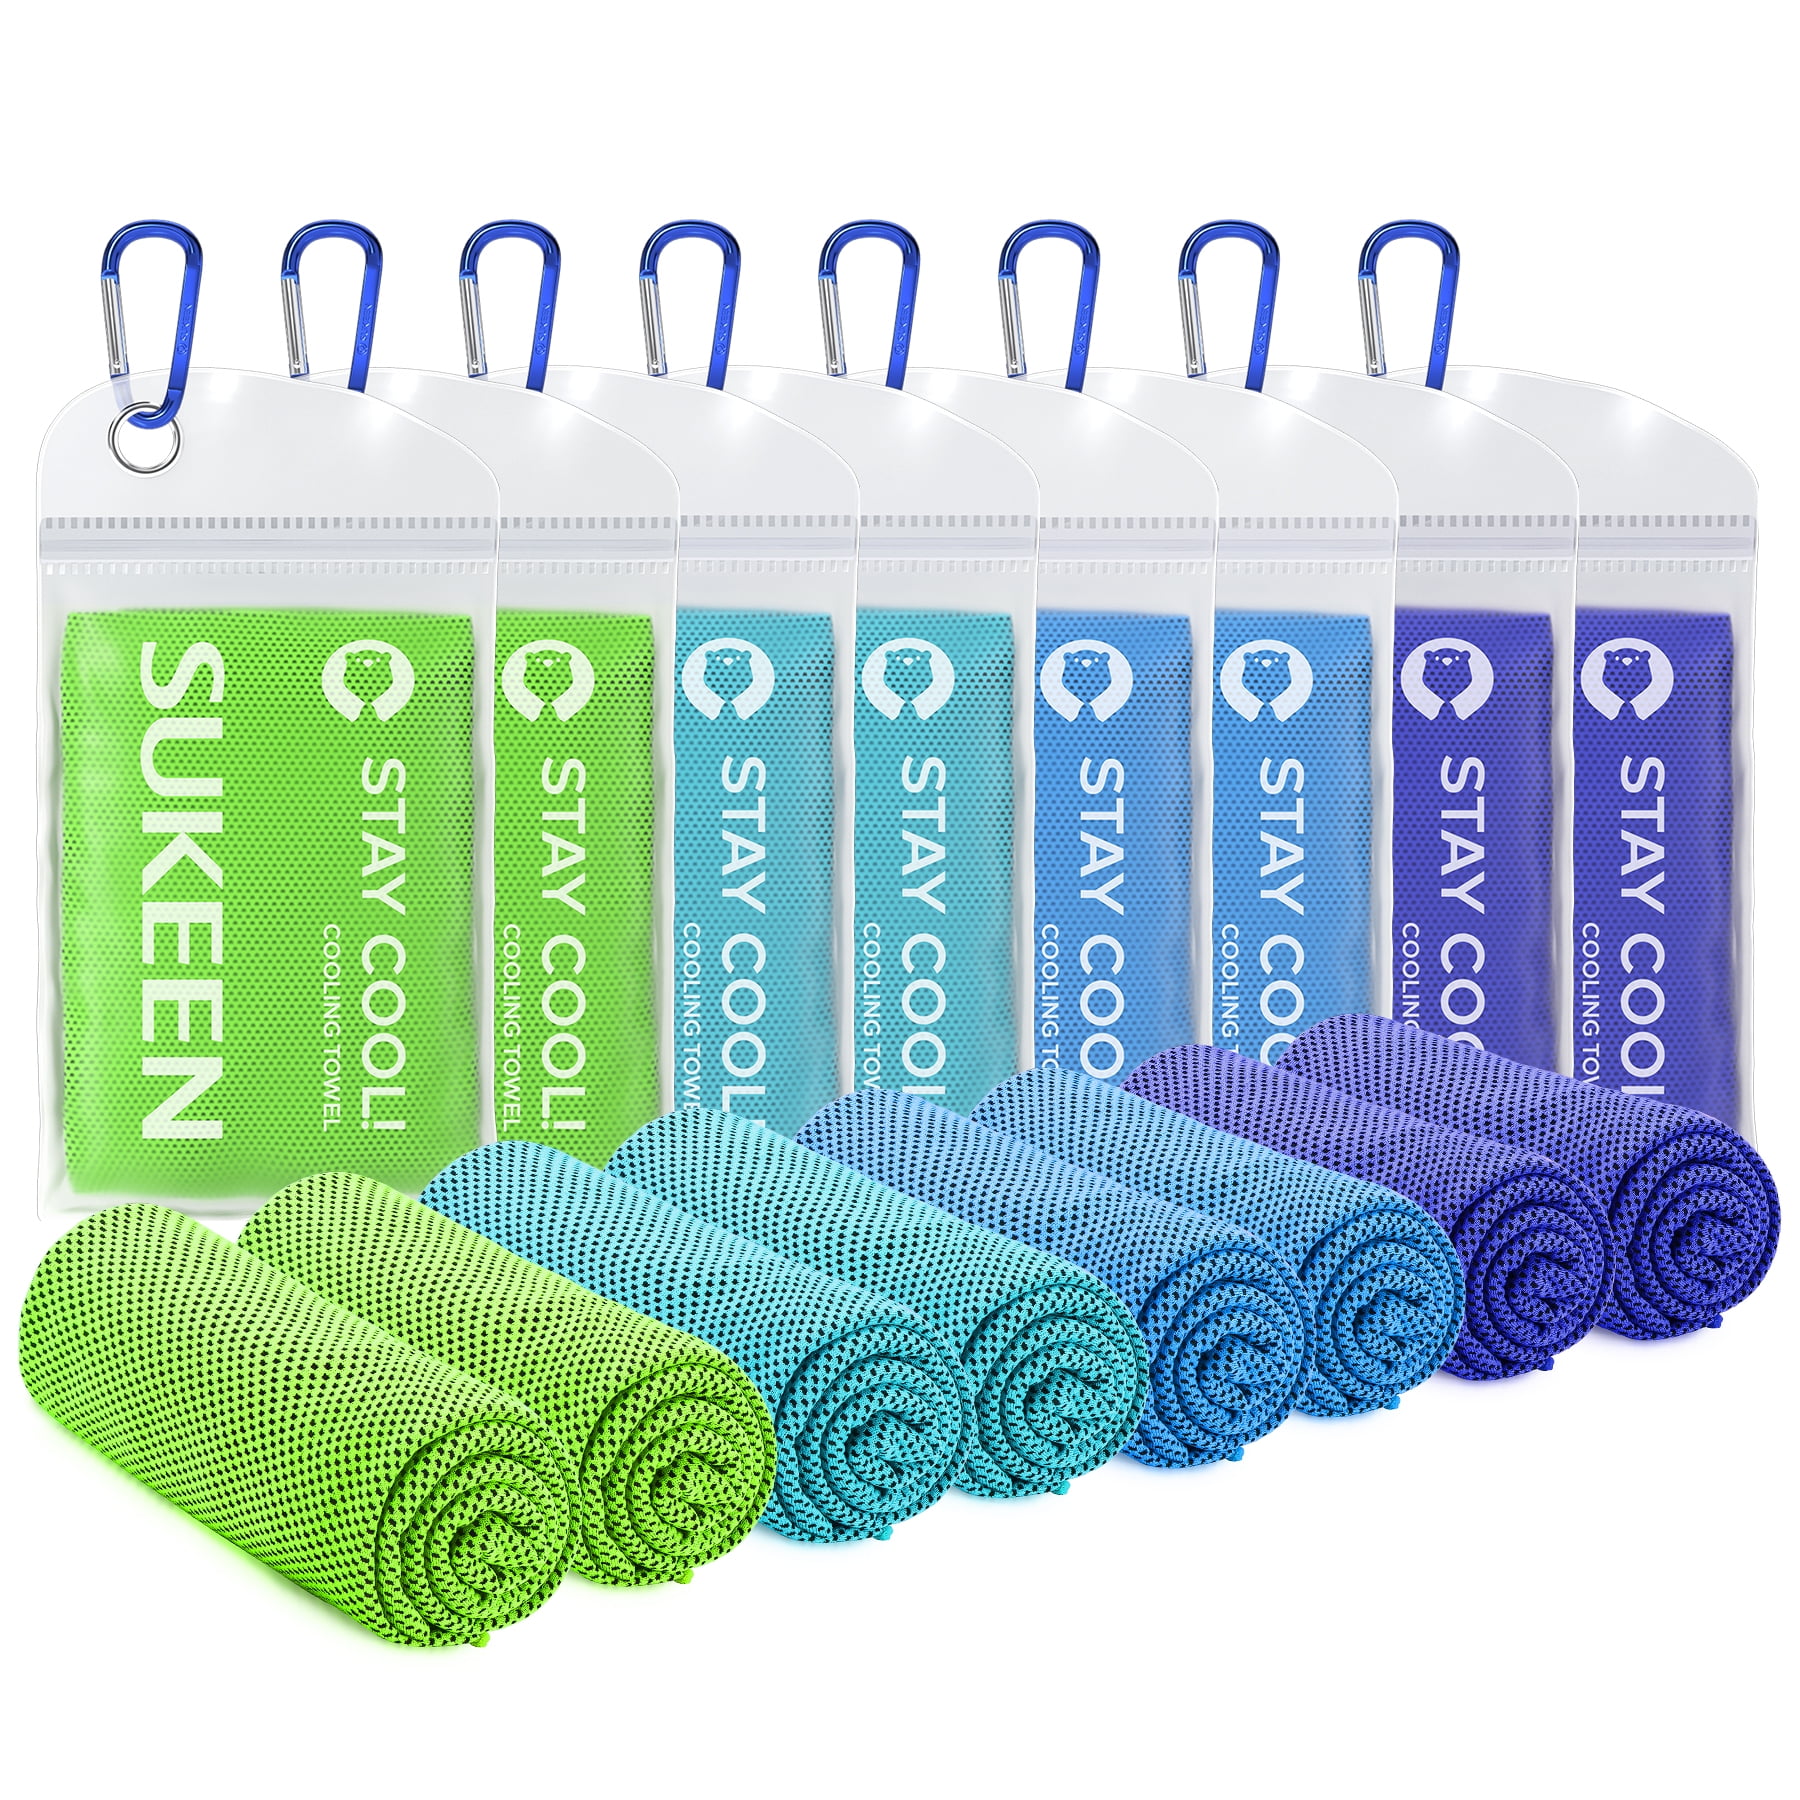 6 Packs Sukeen Cooling Towel,(40x12) Instant Cooling Towels for